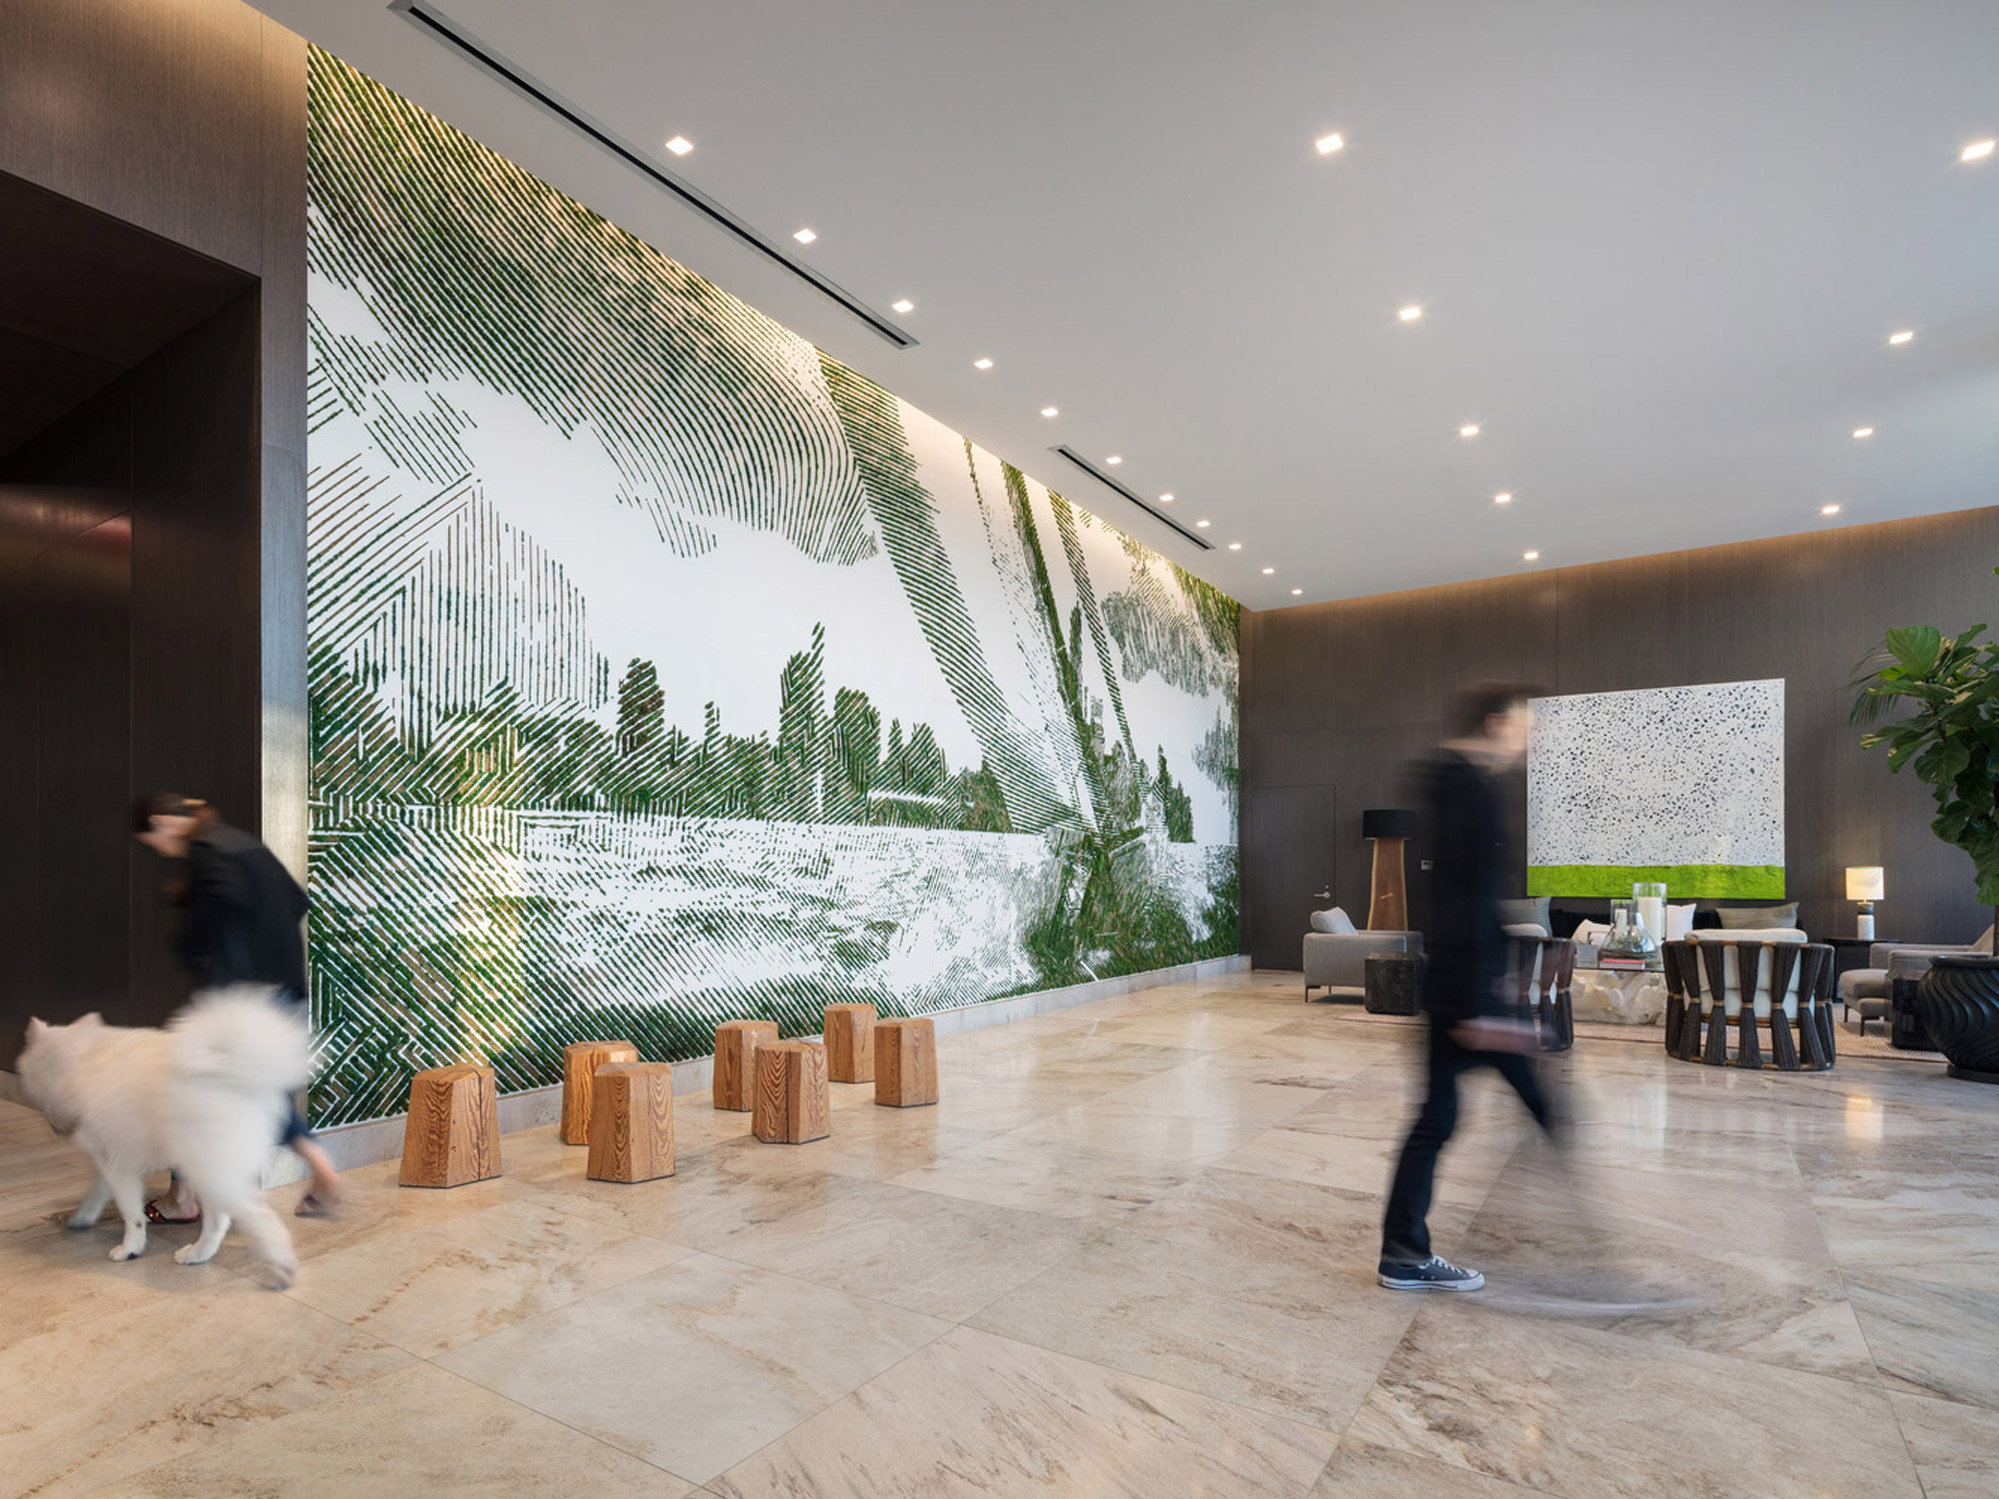 Sleek, expansive lobby featuring a high-contrast green and white abstract wall mural, polished stone flooring, recessed lighting, and natural wood panels. Contemporary seating and wooden stump accents provide an organic touch juxtaposed against the mural's modernity.